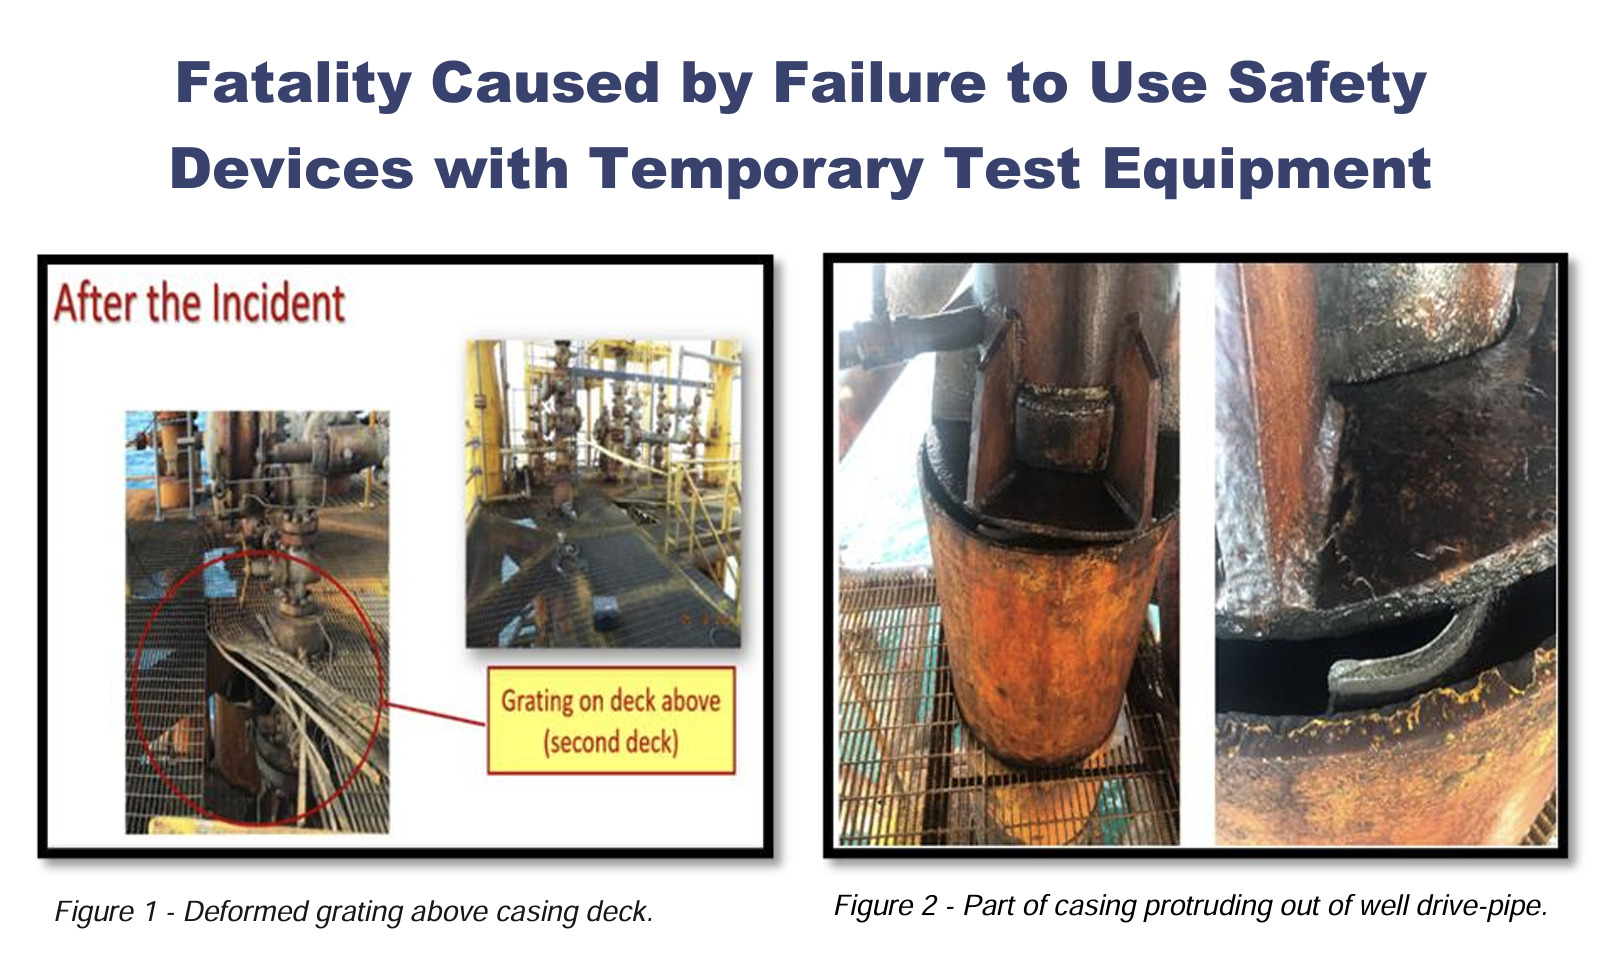 BSEE fatality safety alert